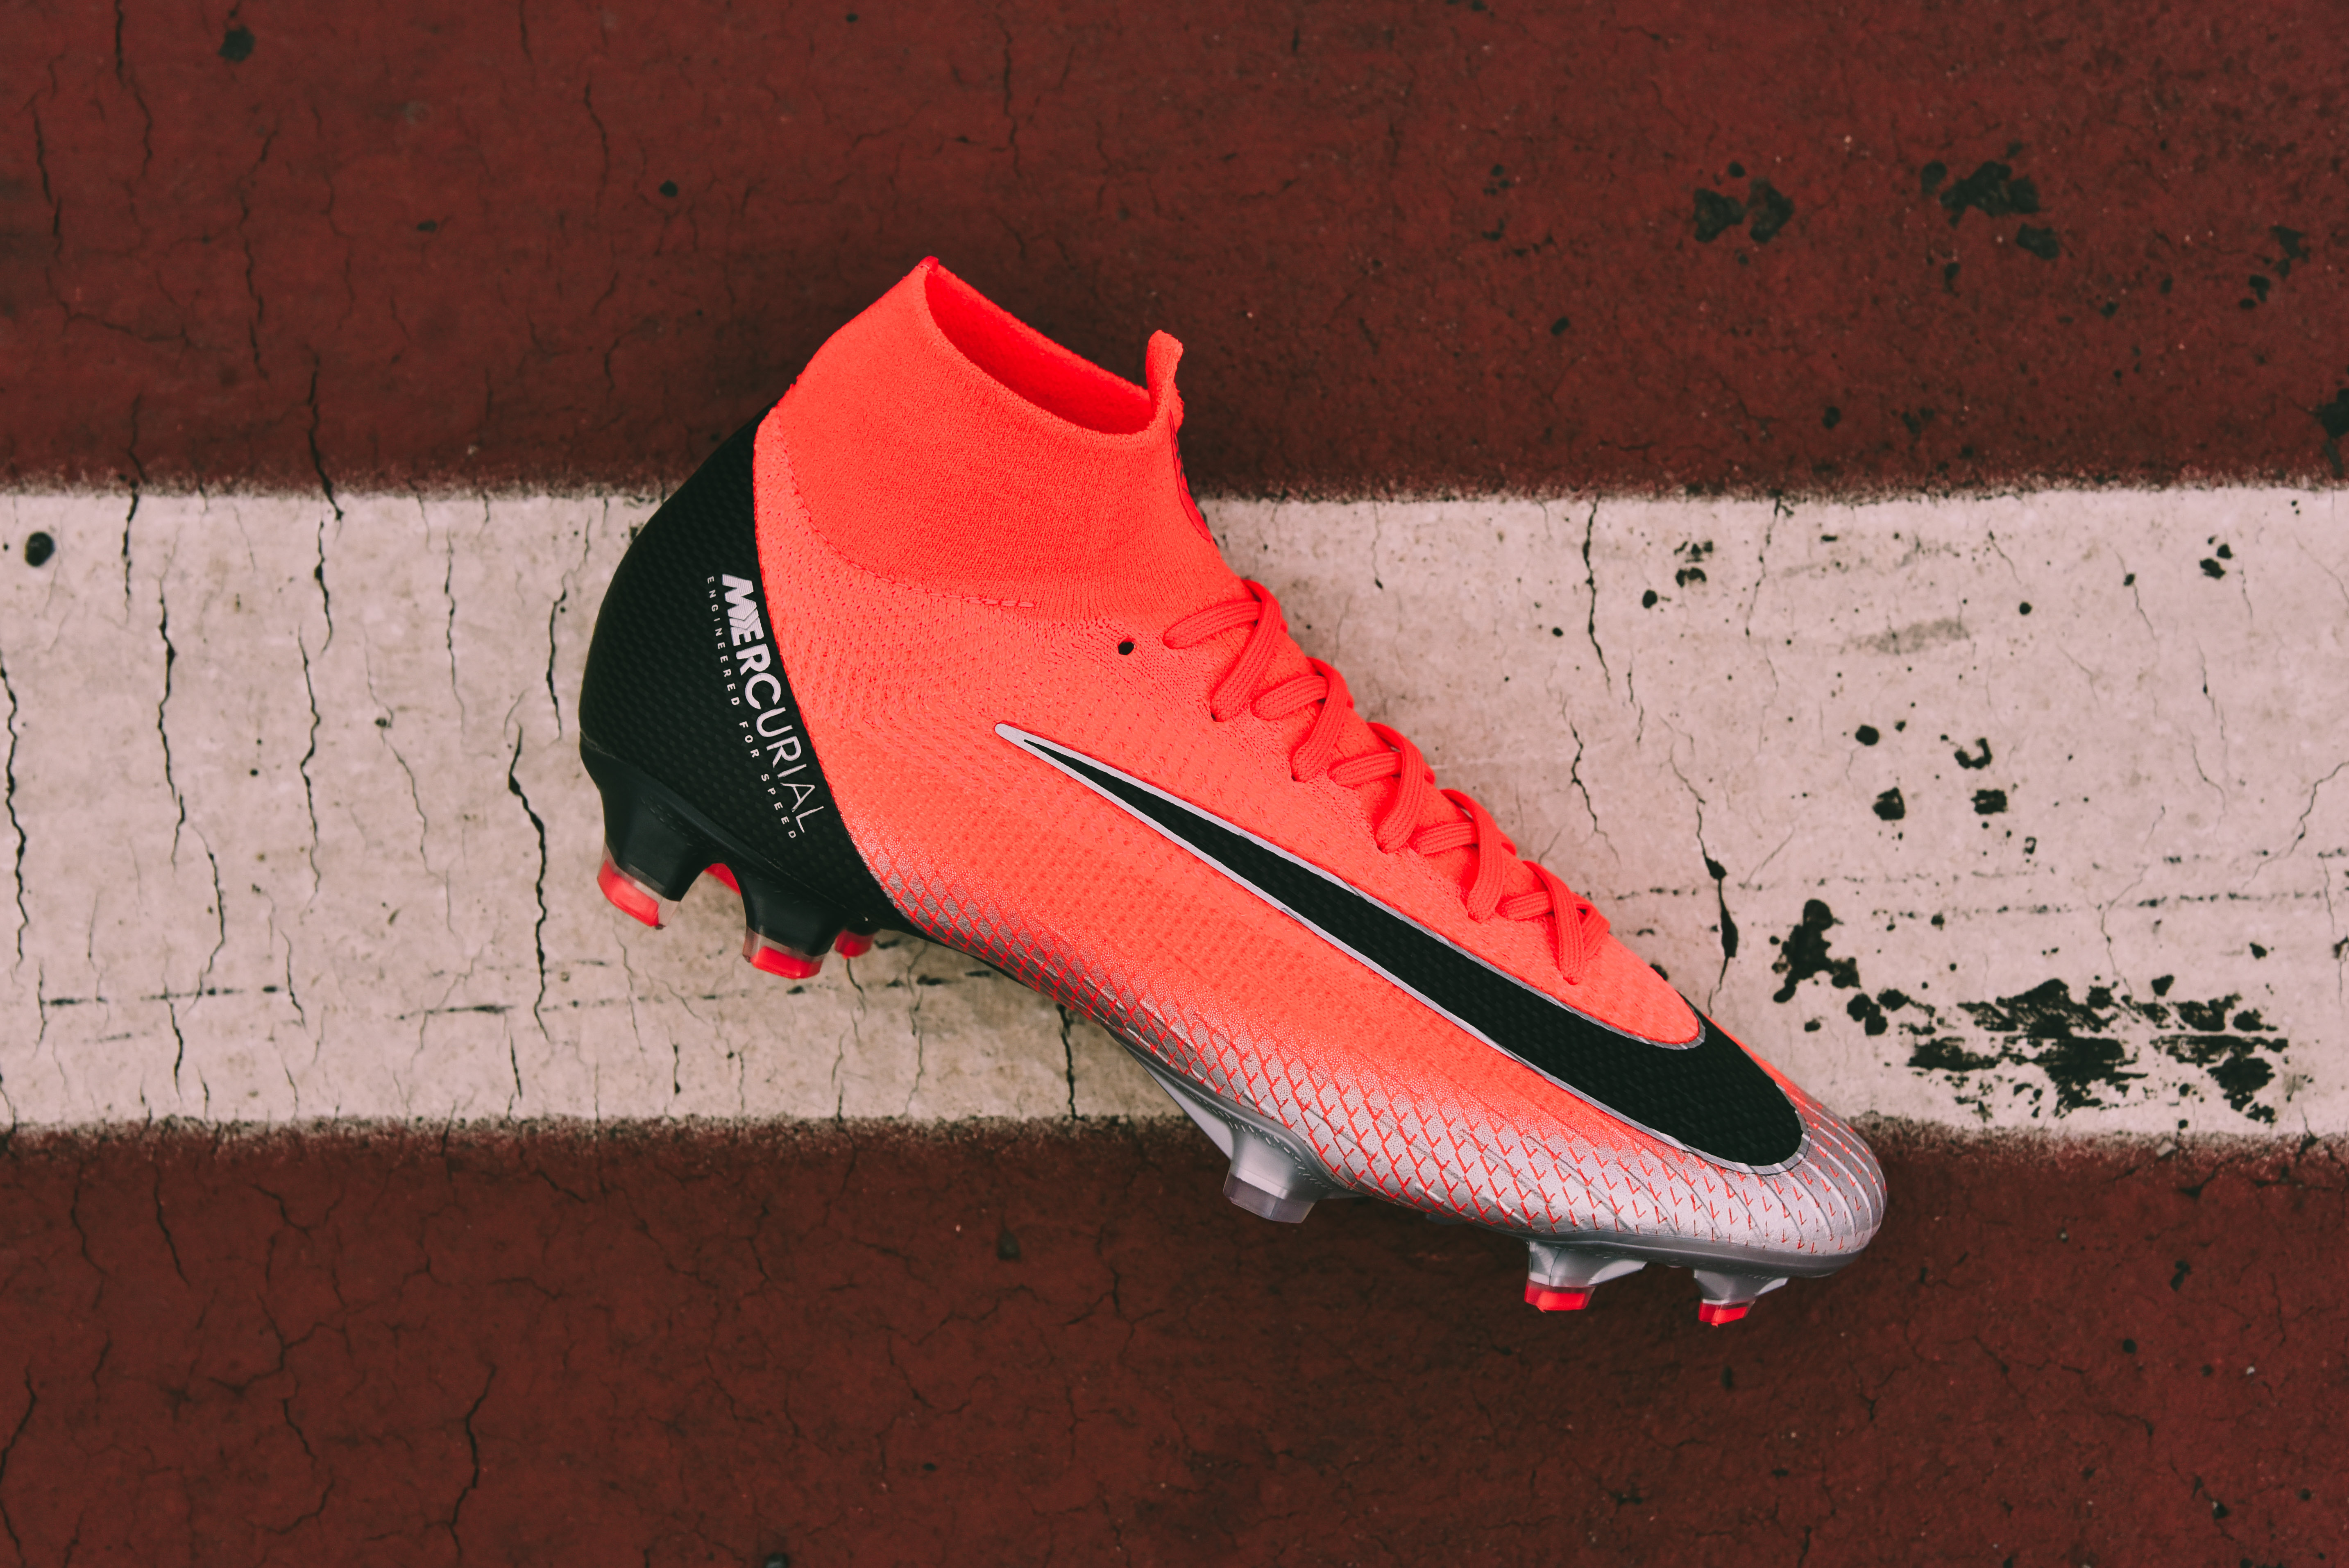 Nike Mercurial Superfly 360 CR7 "Chapter 7"